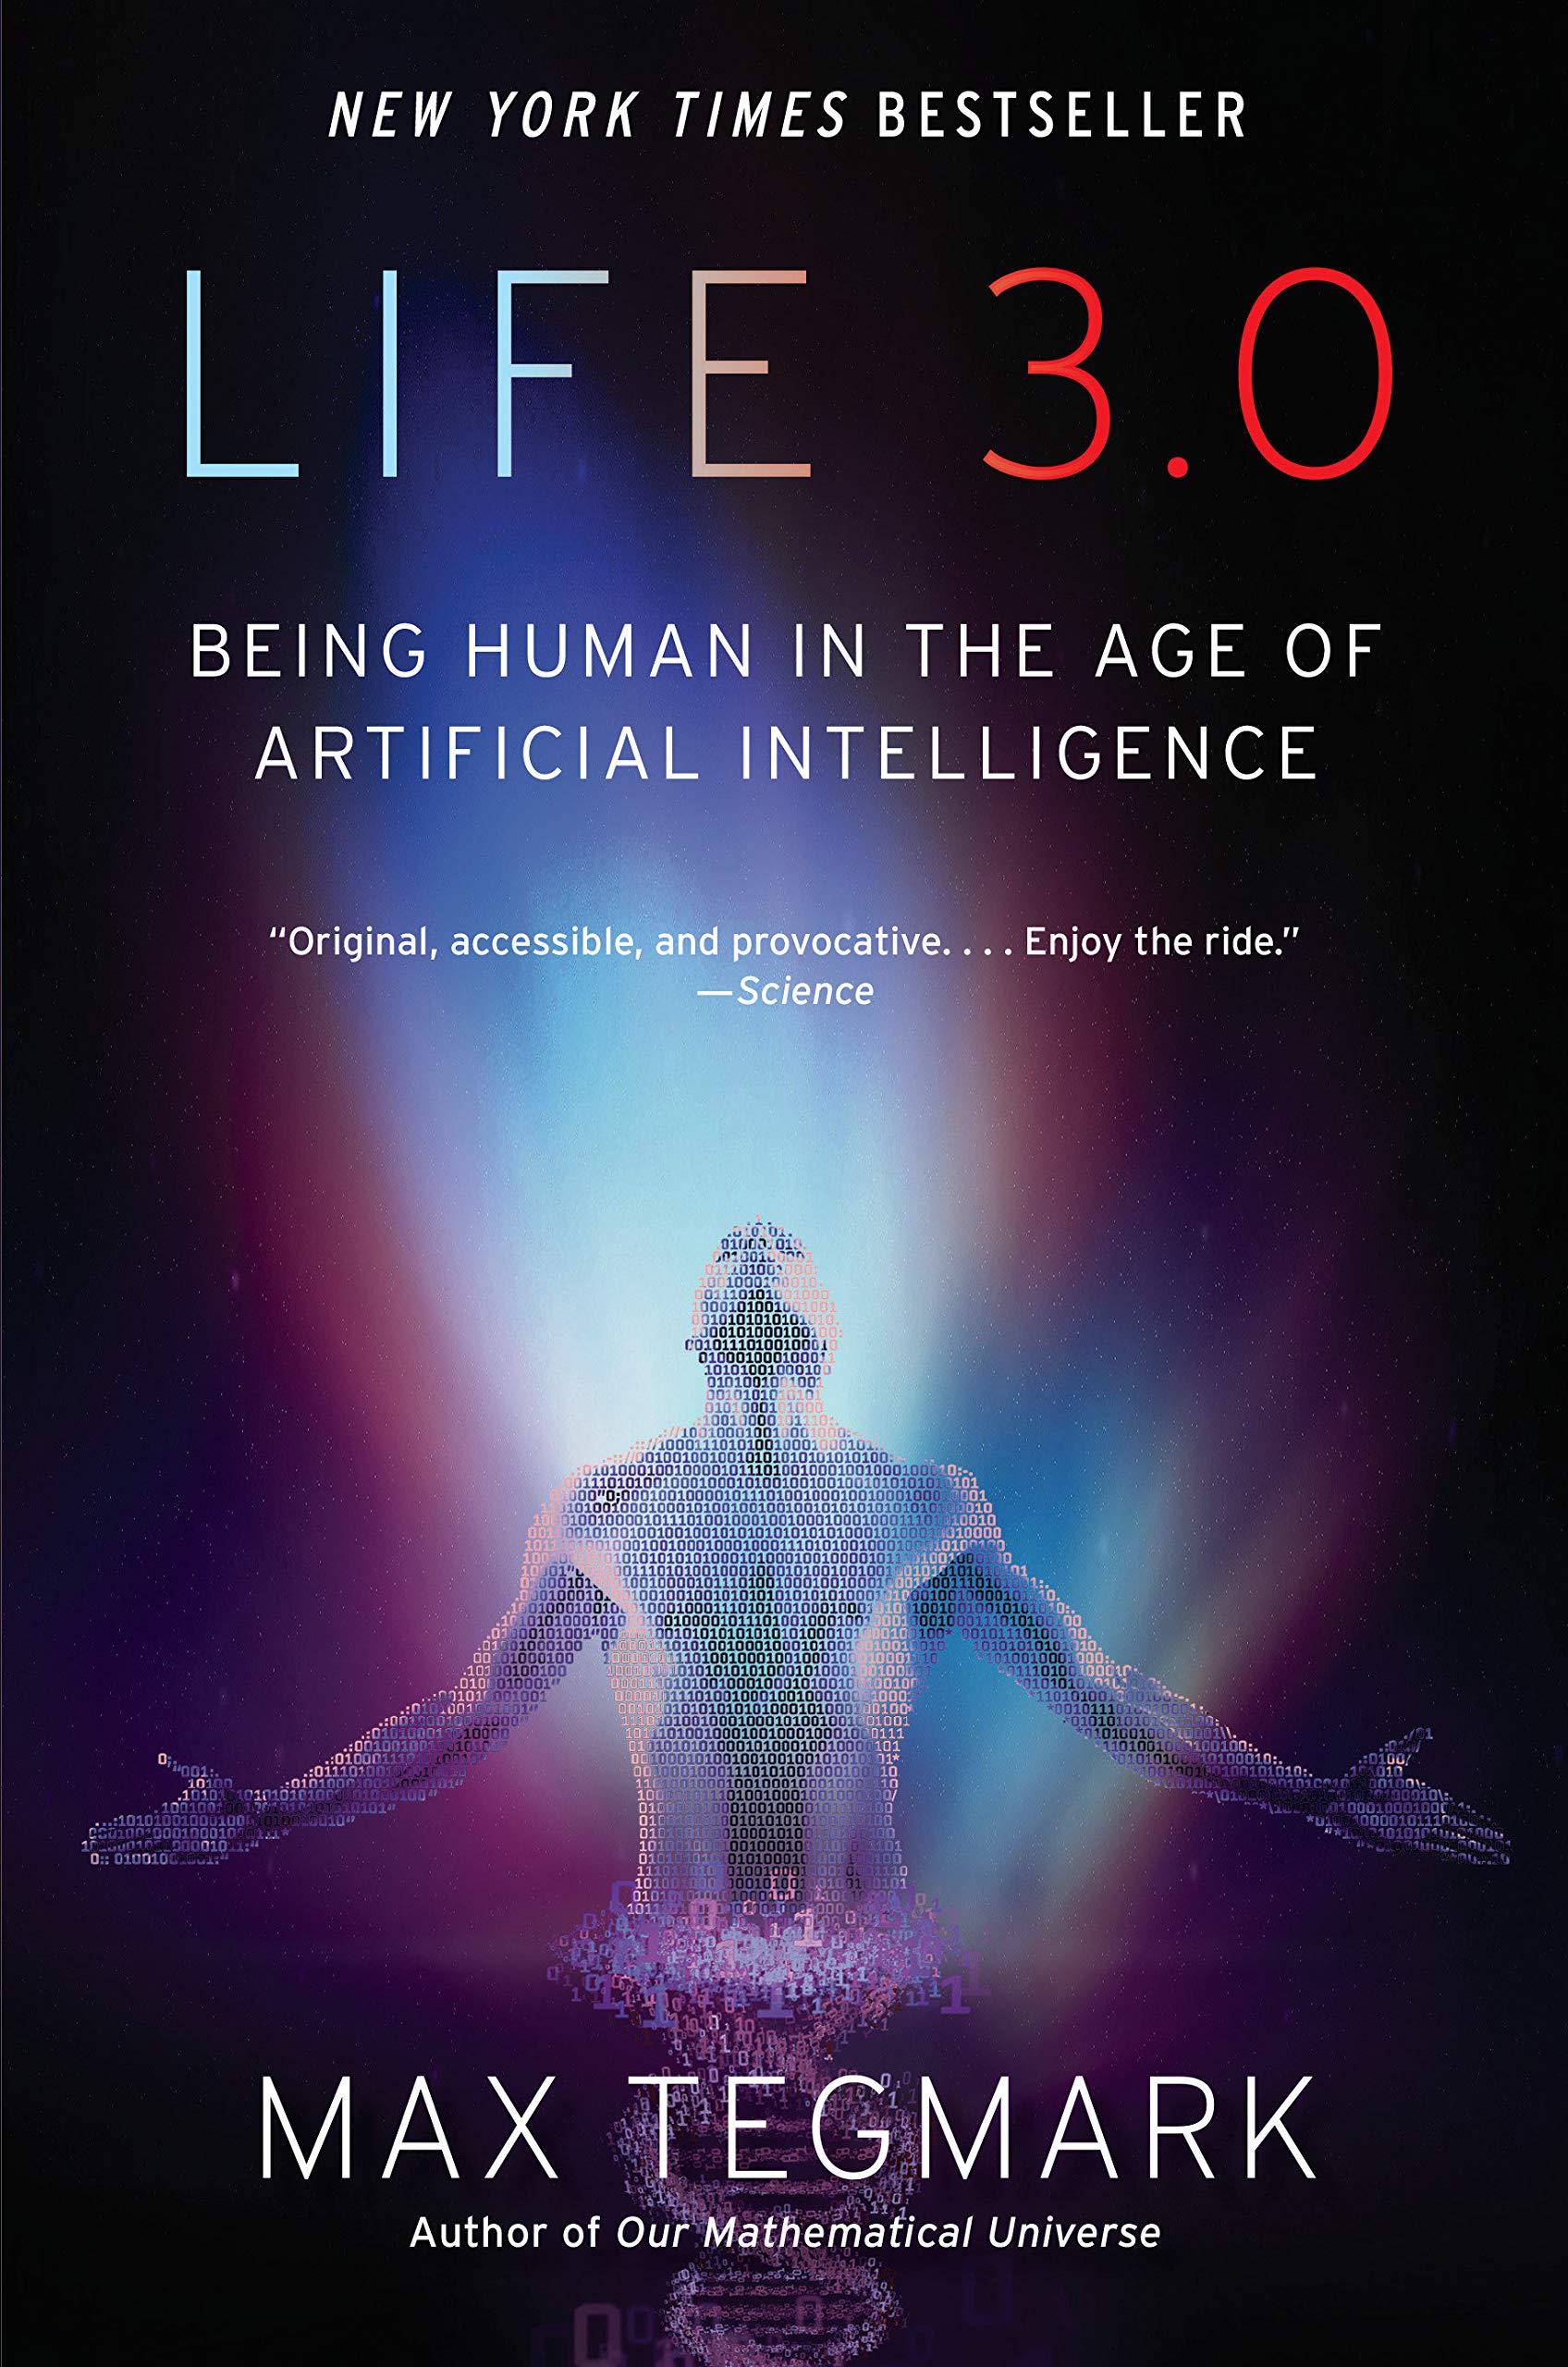 Life 3.0 Being Human in the Age of Artificial Intelligence by Max Tergmark (IG@rkebooks)